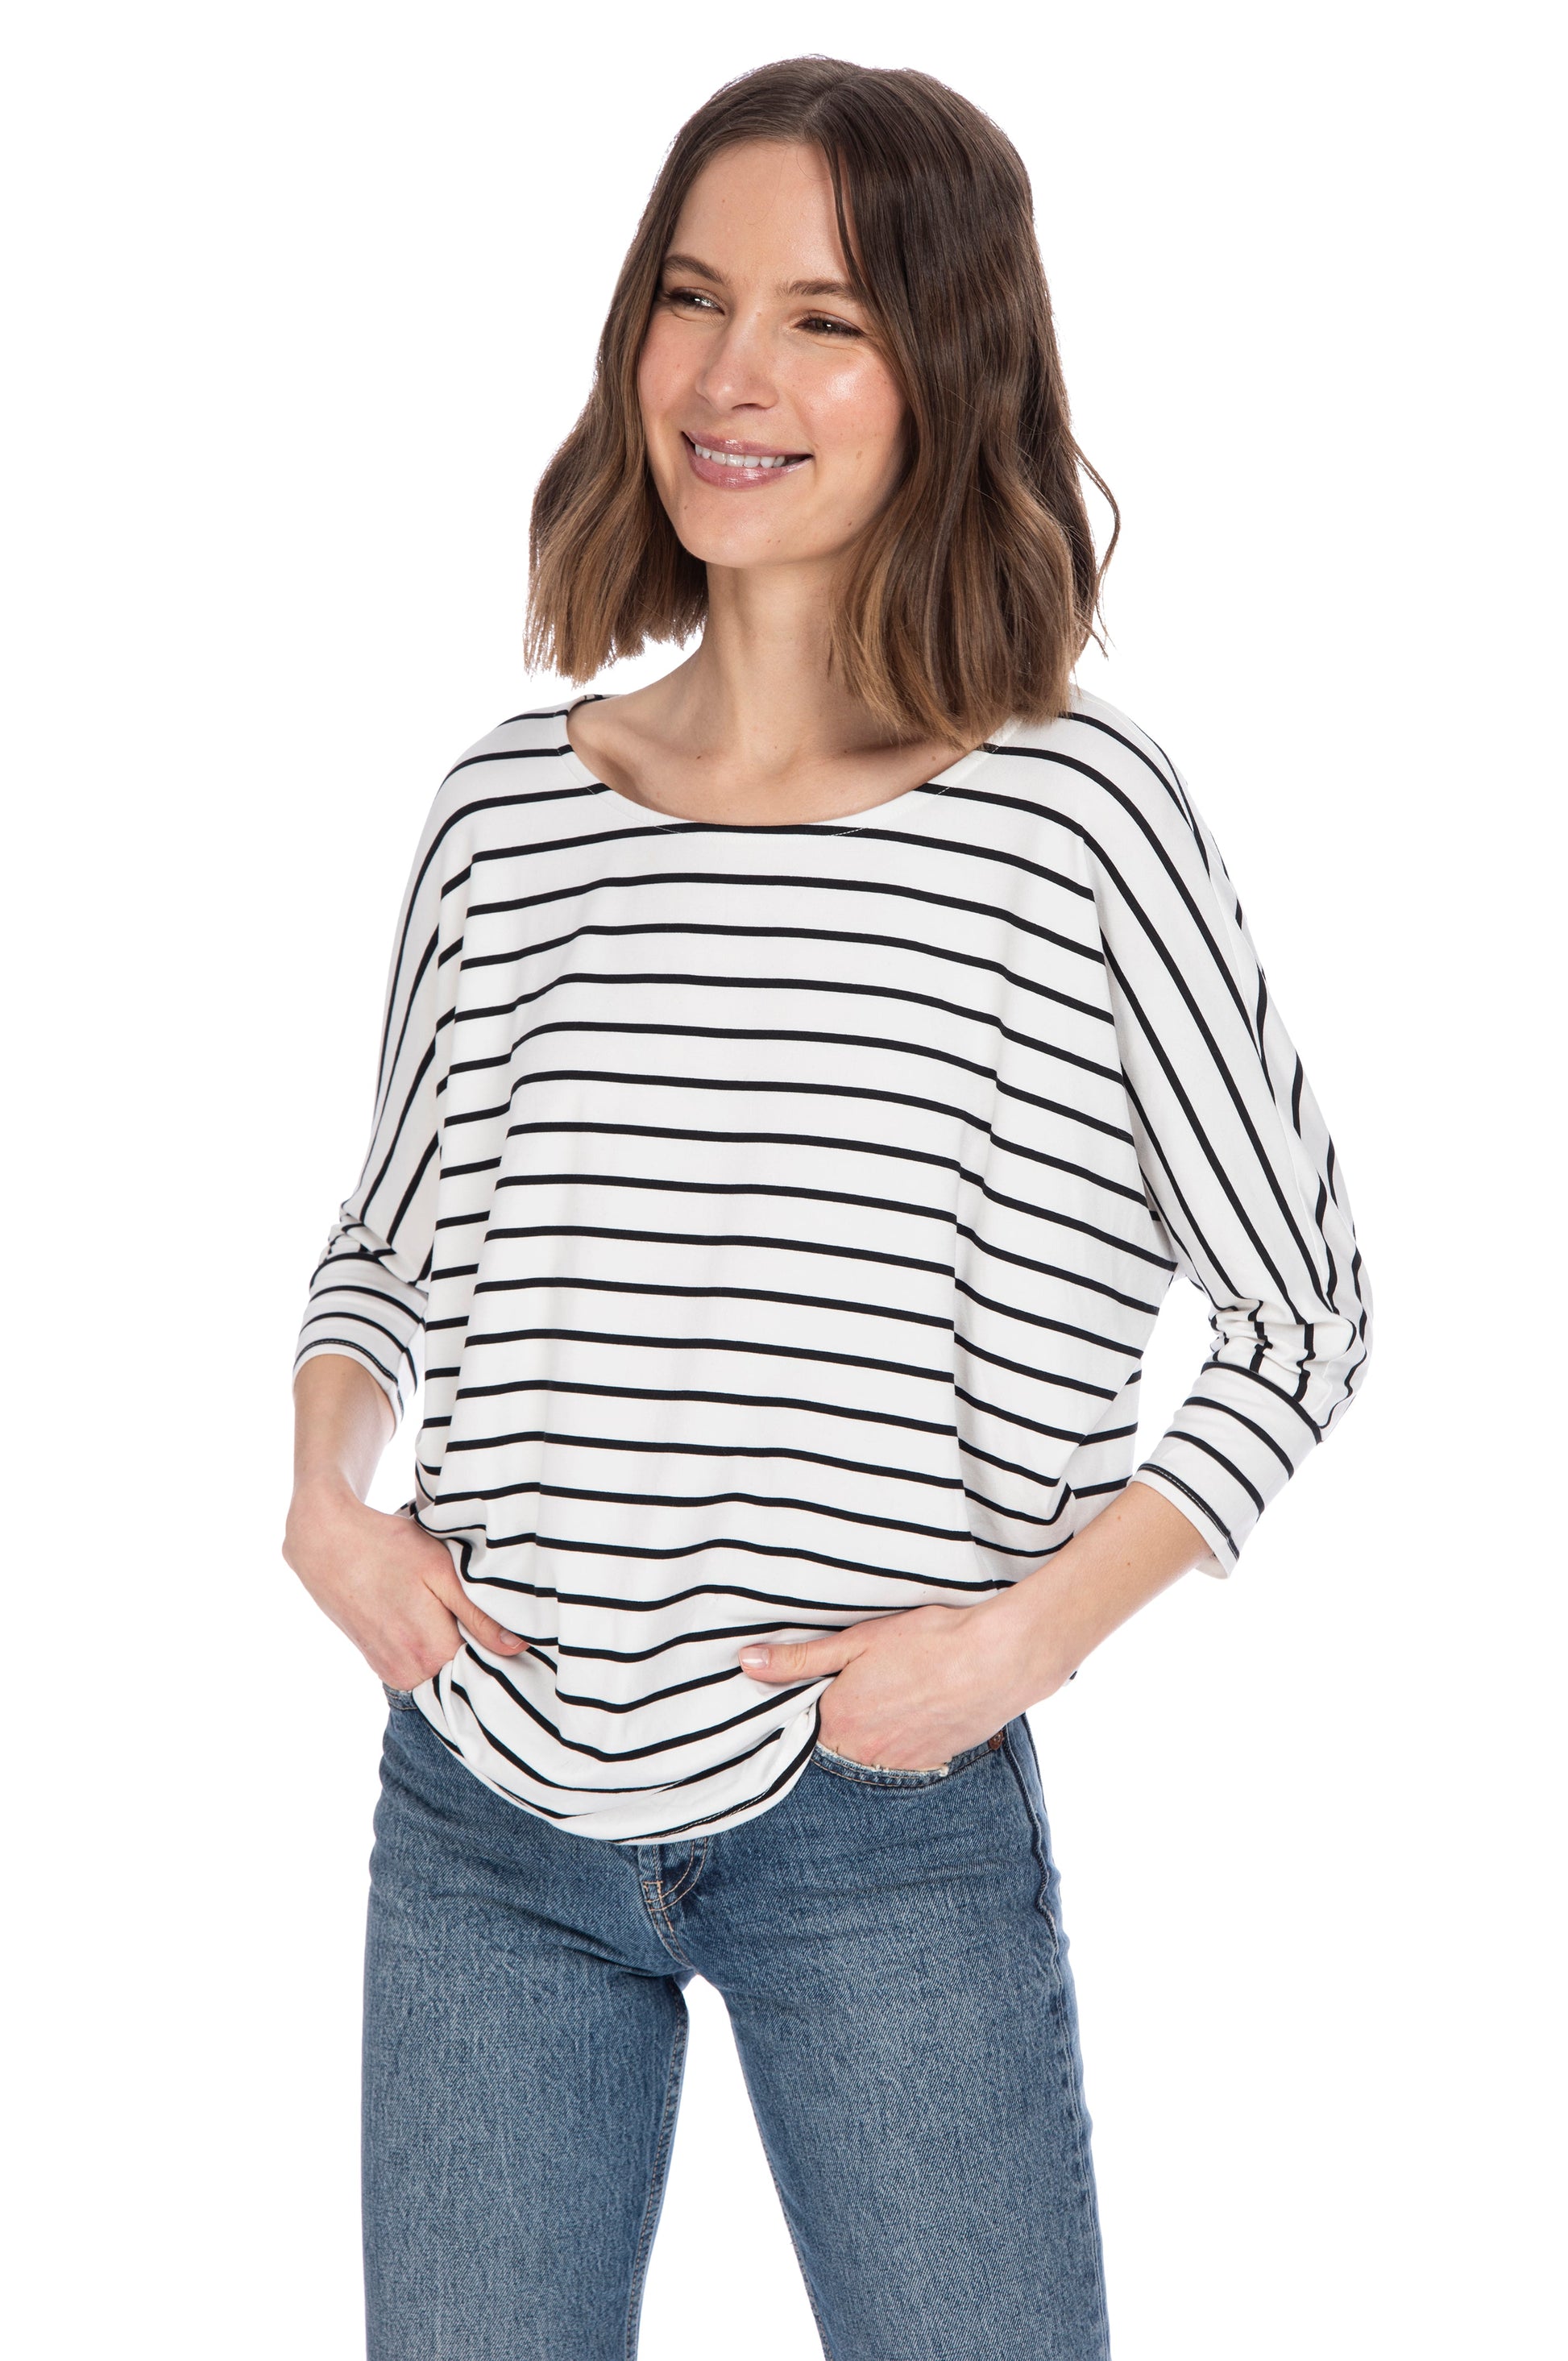 A smiling woman in a casual striped B Collection by Bobeau 3/4 SLV DOLMAN BUTTER TOP and blue jeans standing confidently with one hand in her pocket.